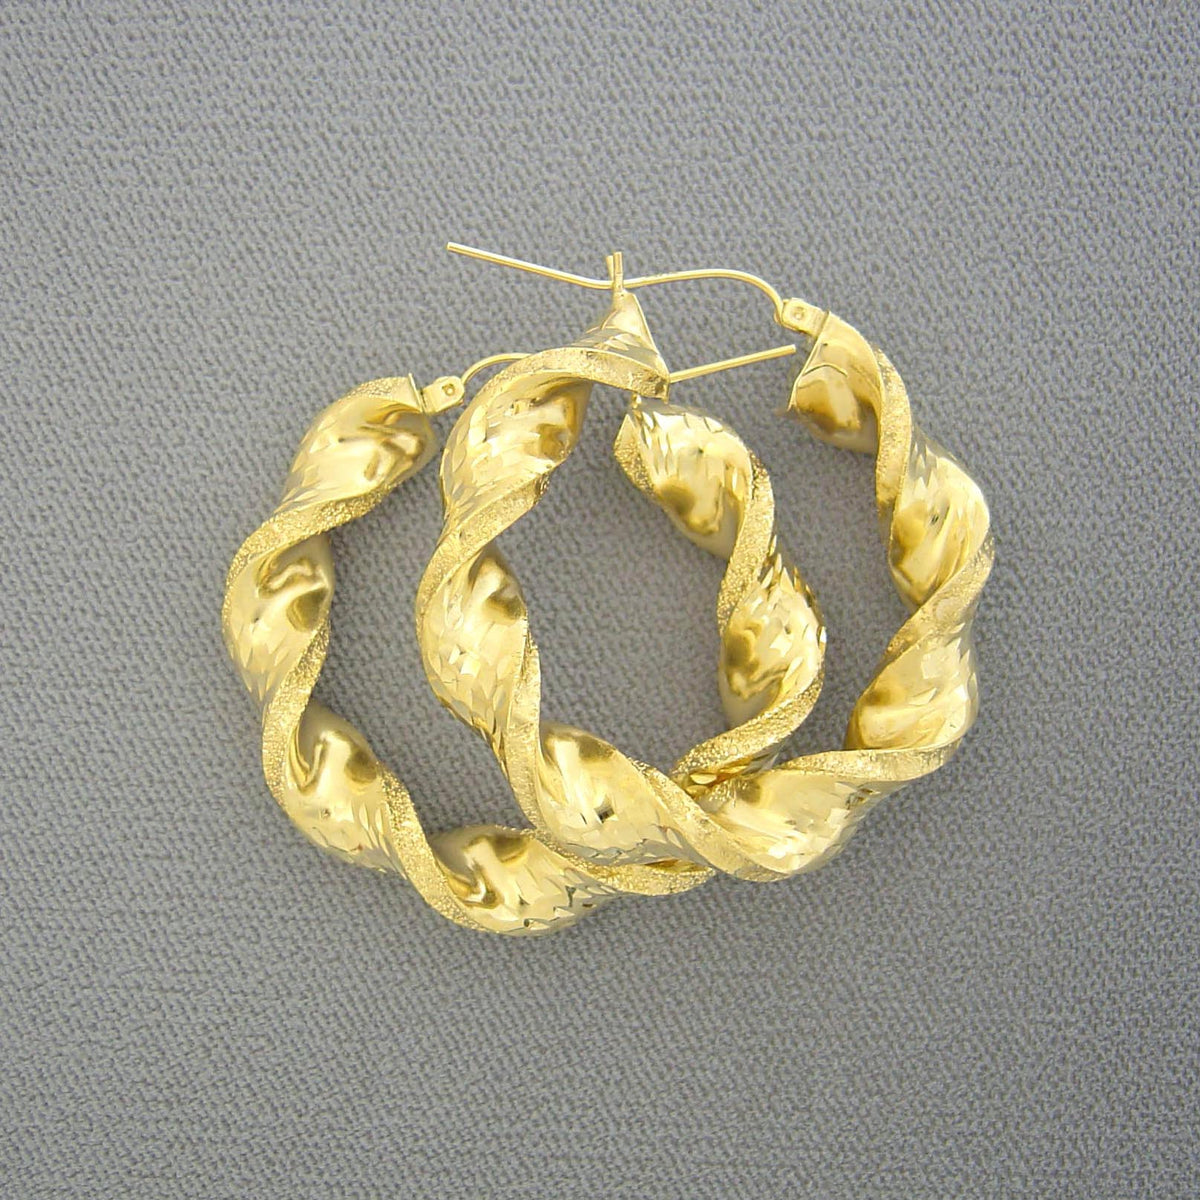 10k Round Real Gold 8 mm Twisted Hollow Hoop Earrings 1.6 inches.